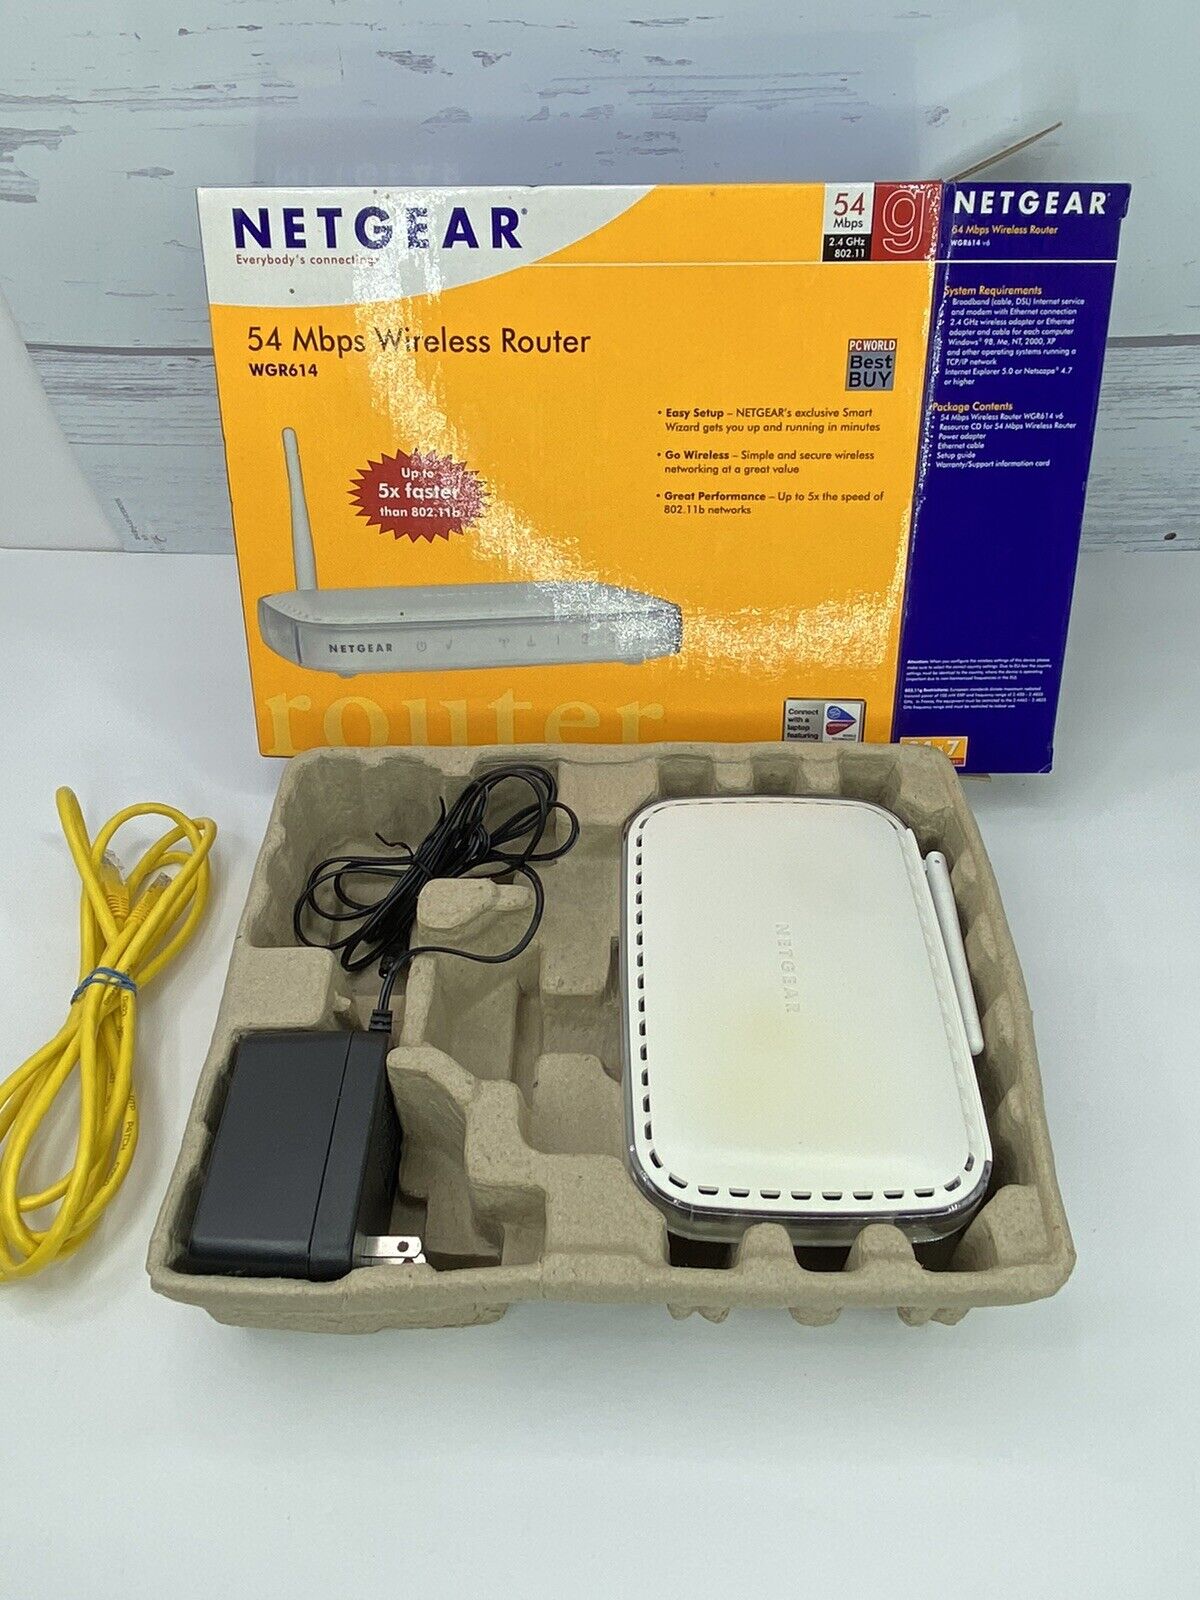 NETGEAR WIRELESS-G ROUTER WGR614 W/Charger Box Ethernet Cable